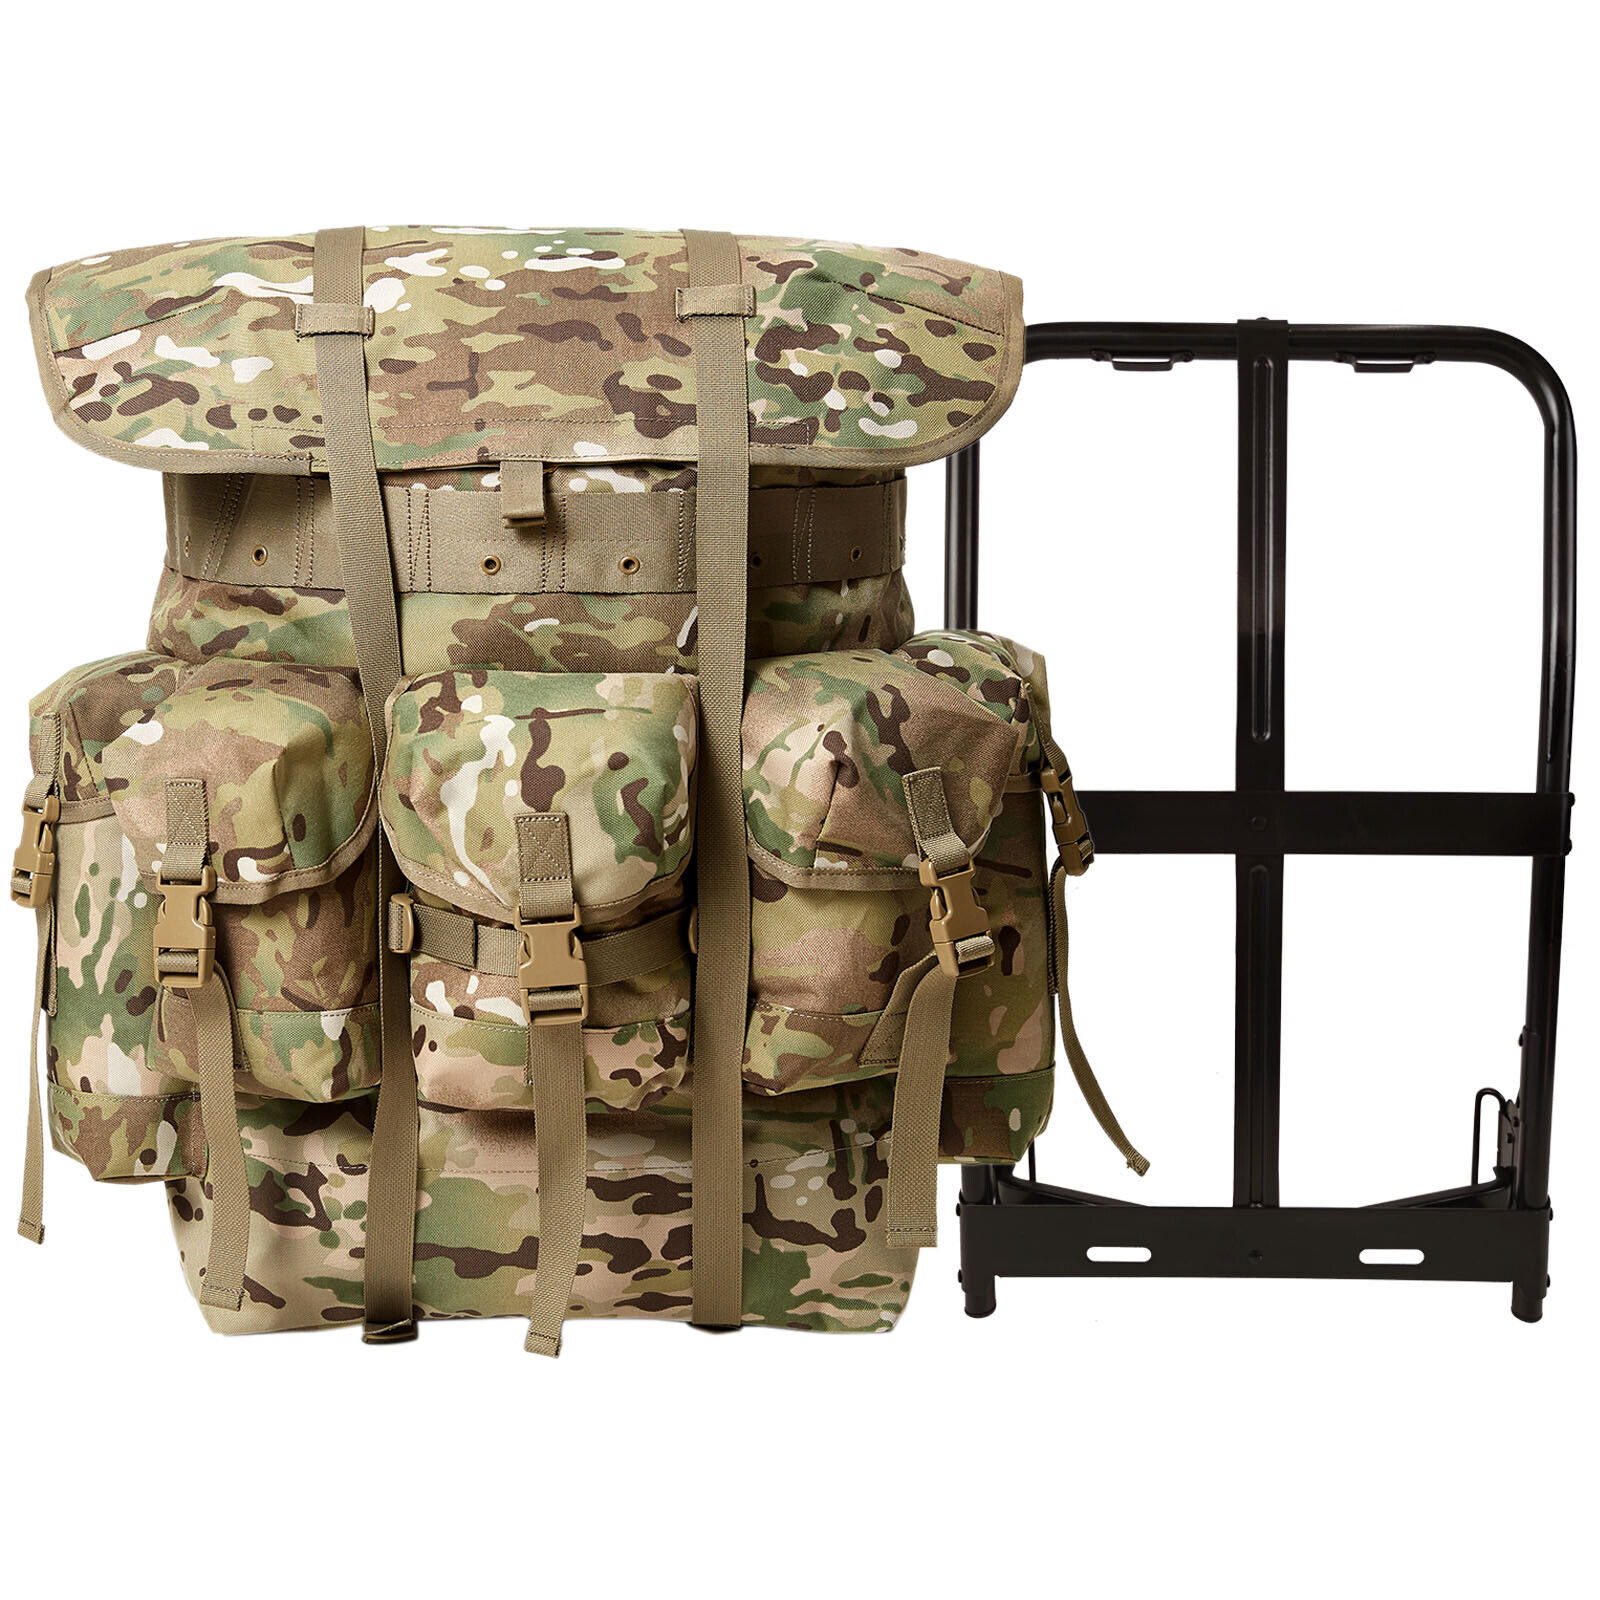 AKMAX Military ALICE Pack Large Rucksack, Army Bag with Frame/Straps, Multicam